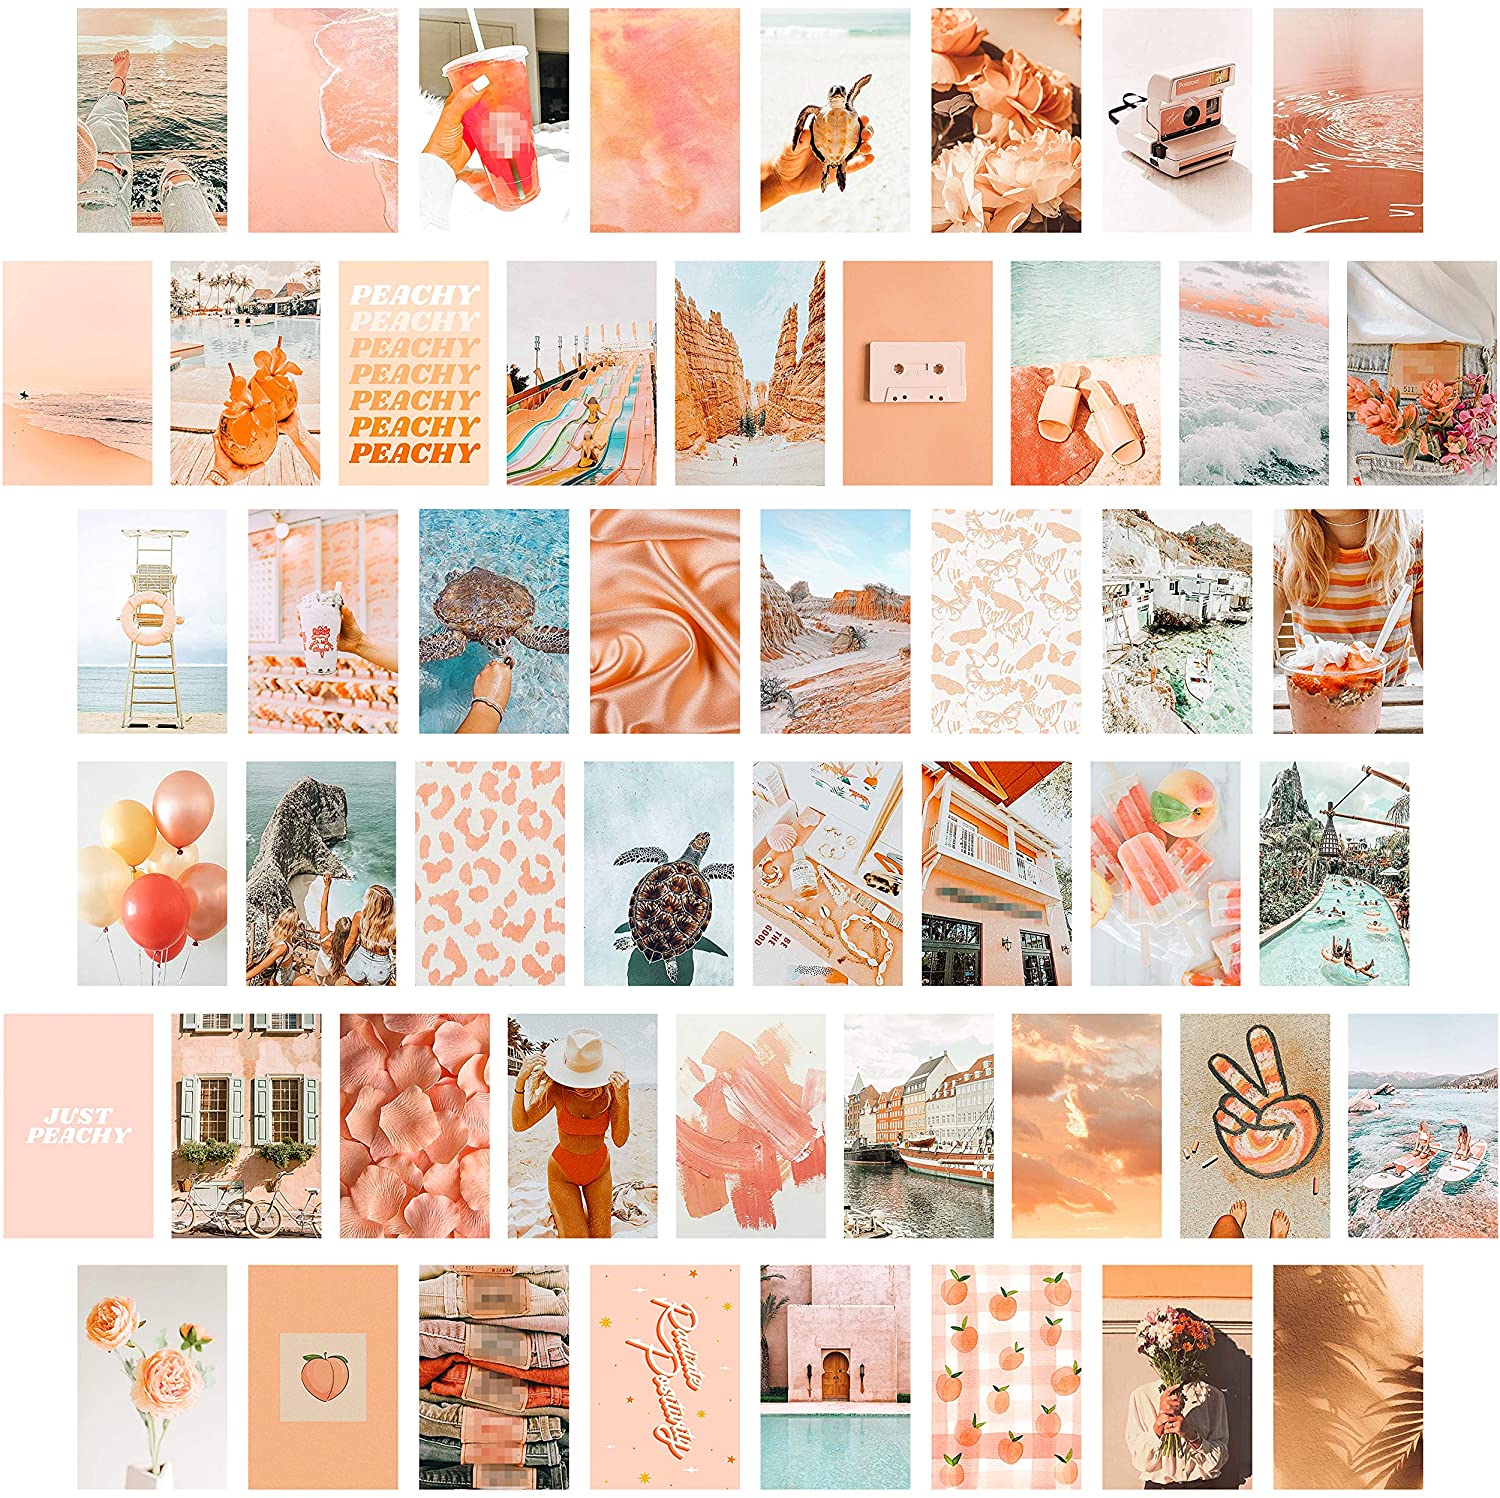 CY2SIDE 50PCS Peach Beach Aesthetic Picture for Wall Collage, 50 Set 4x6 inch, Boho Style Collage Print Kit, Teal Color Room Decor for Girls, Wall Art Print for Room, Dorm Photo Display